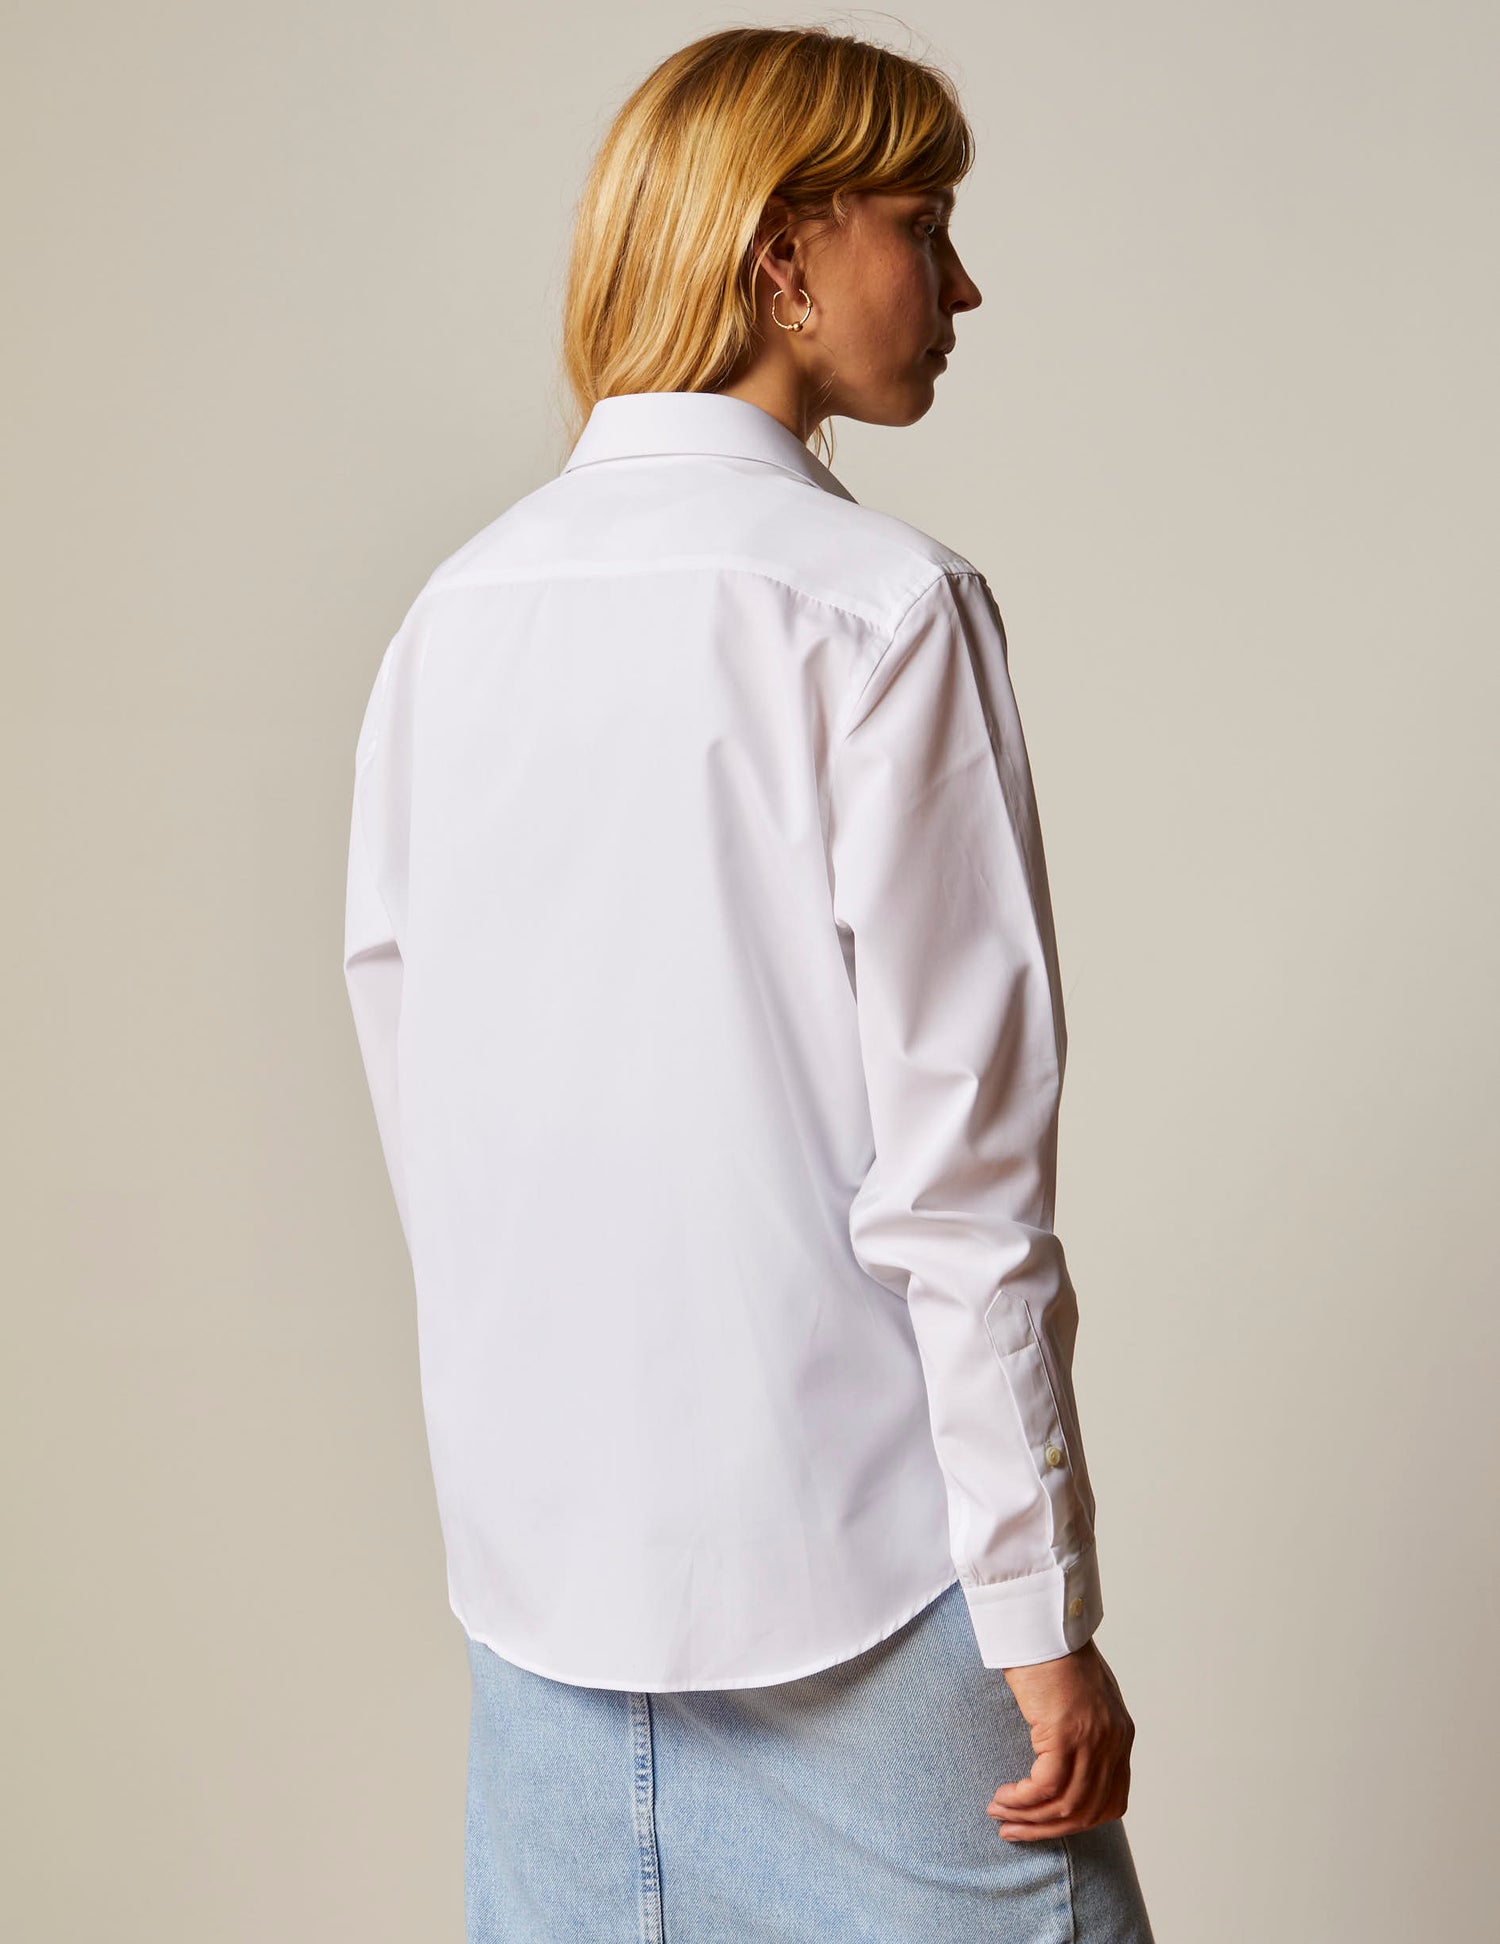 White "Je t'aime" shirt with gold embroidery - Poplin - Figaret Collar#4